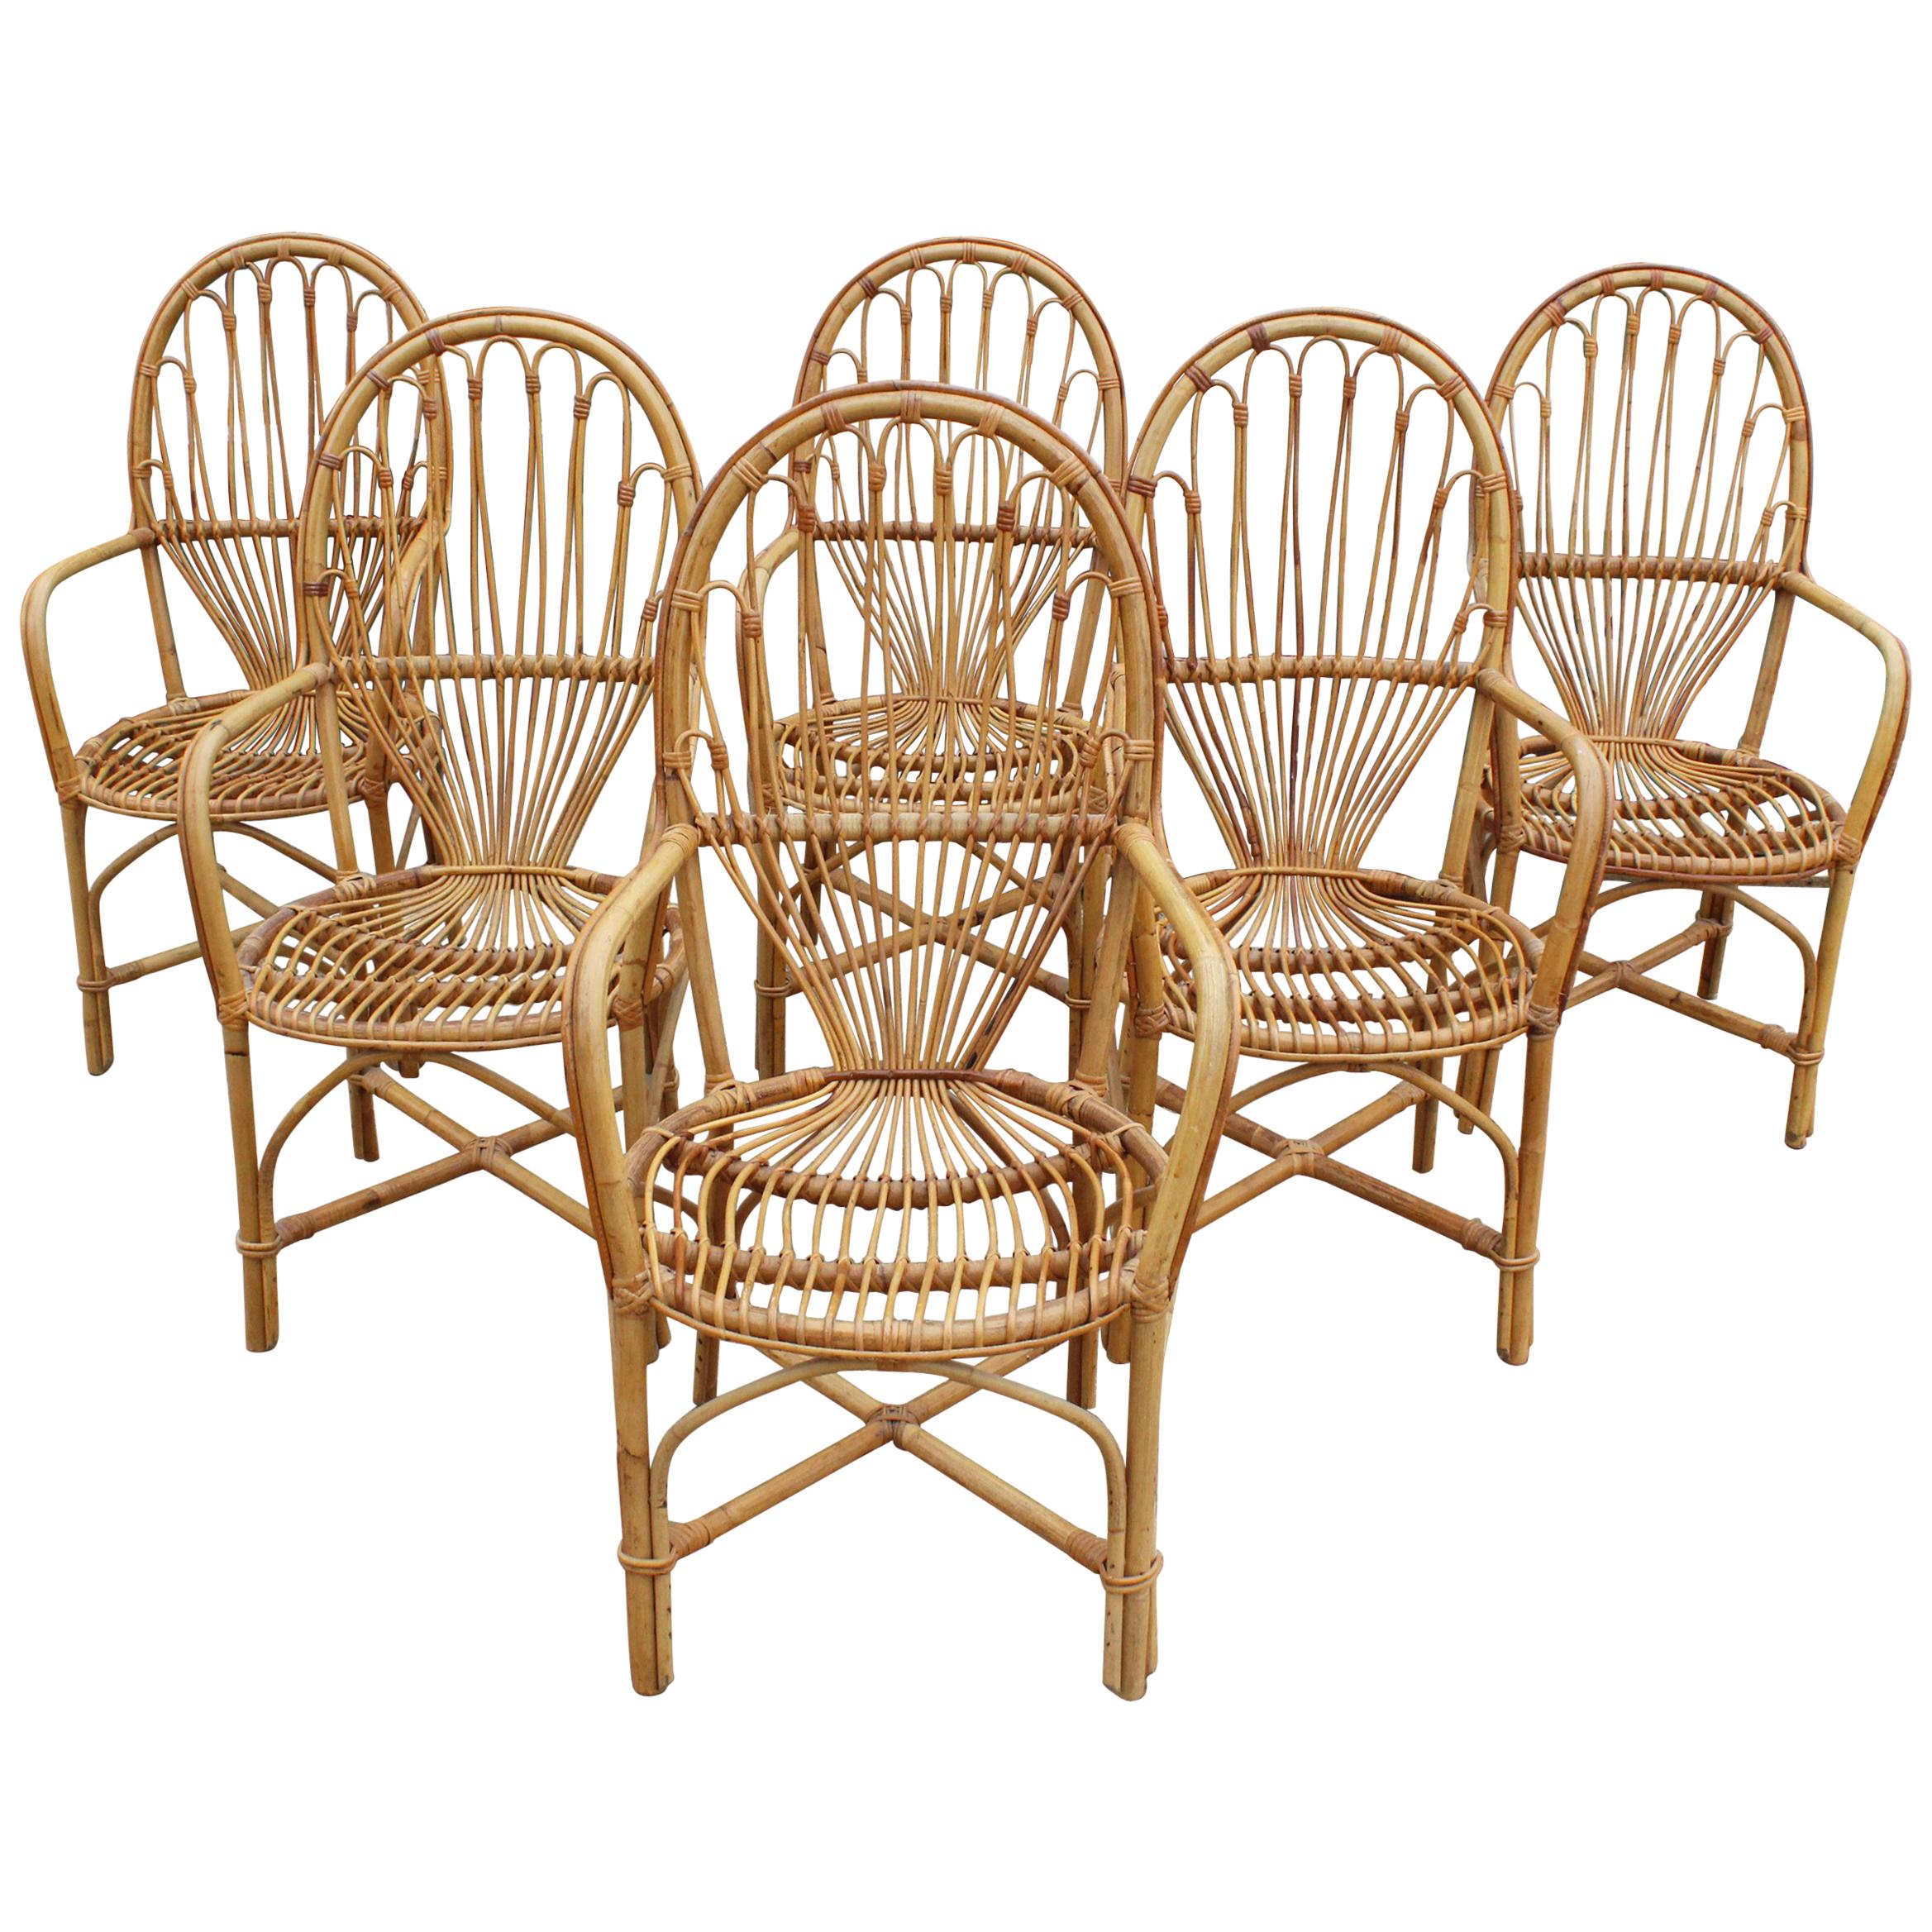 1970s Set of Six French Handcrafted Bamboo and Wicker Chairs